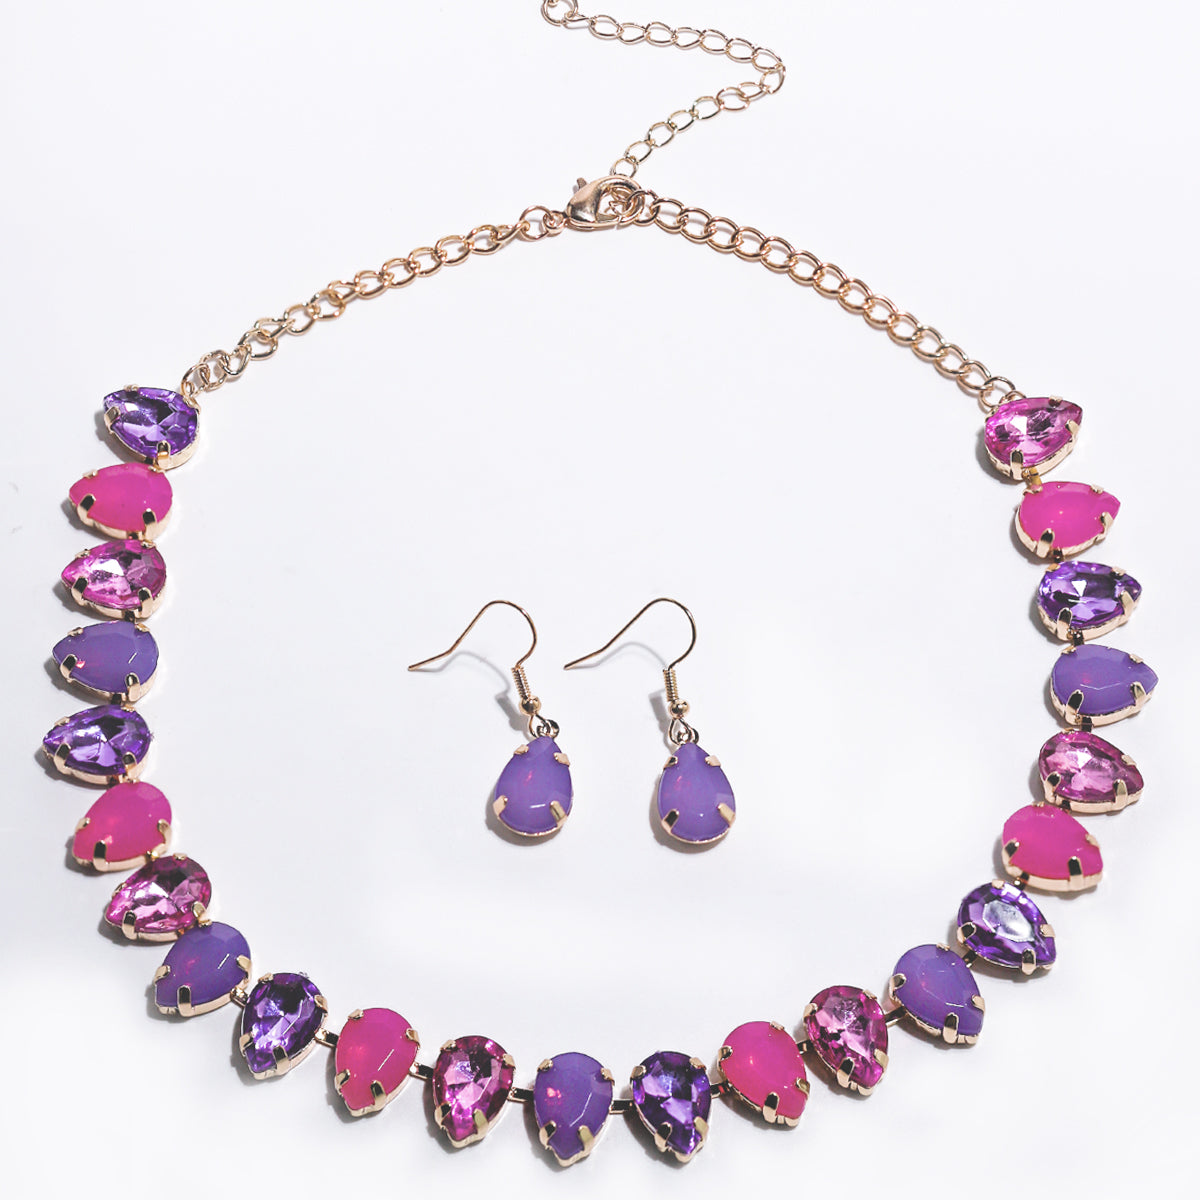 Elegant Luxurious Shiny Water Droplets Alloy Chain Inlay Resin Women's Jewelry Set